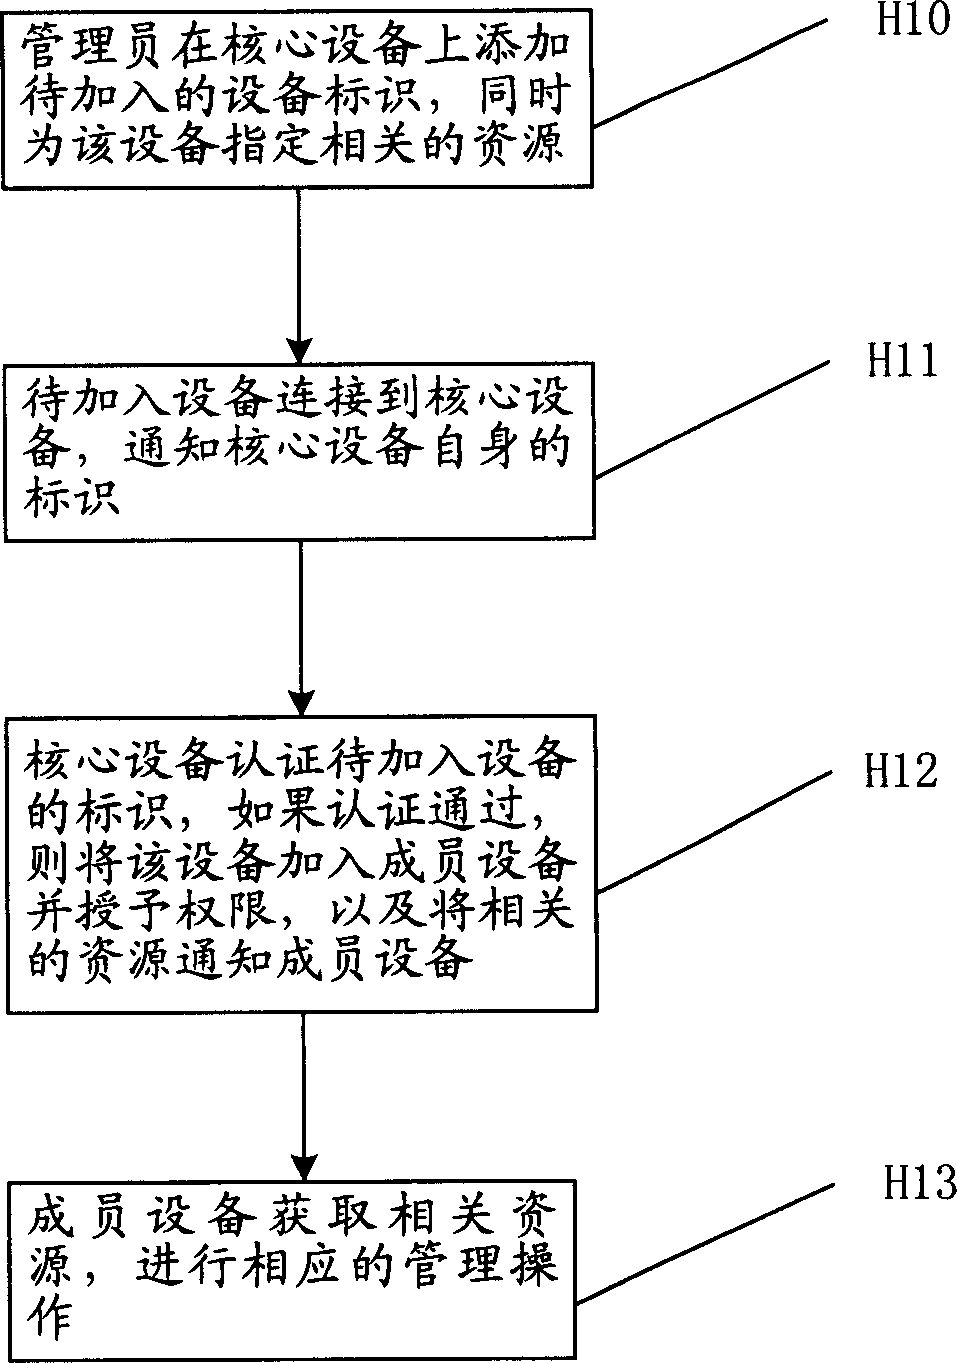 Method for managing network device